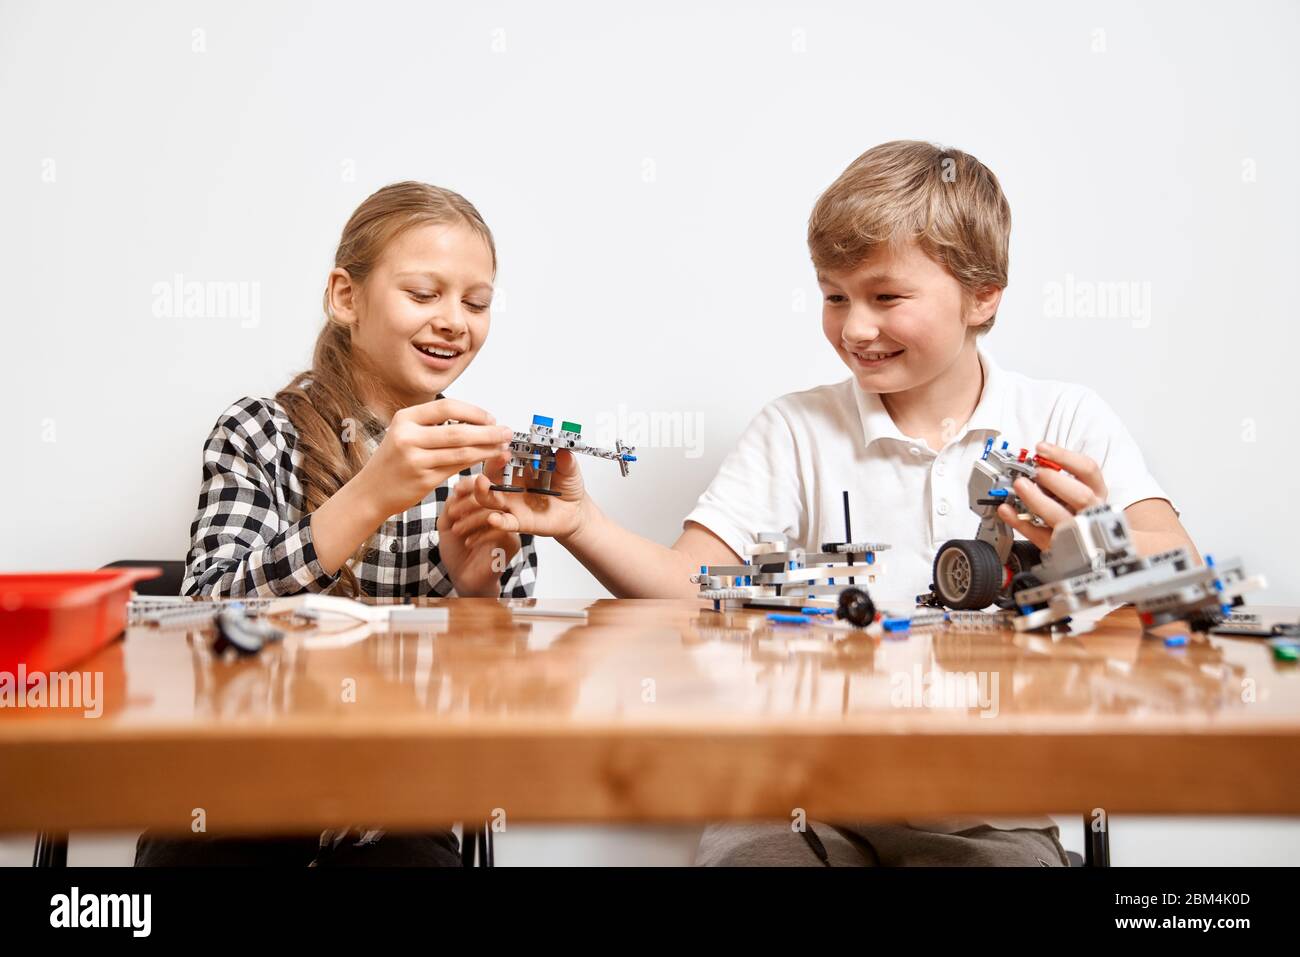 Interesting building kit for kids on table. Close up of boy and girl having fun at table, creating vehicles. Friends laughing, chatting and working on project together. Concept of science engineering. Stock Photo